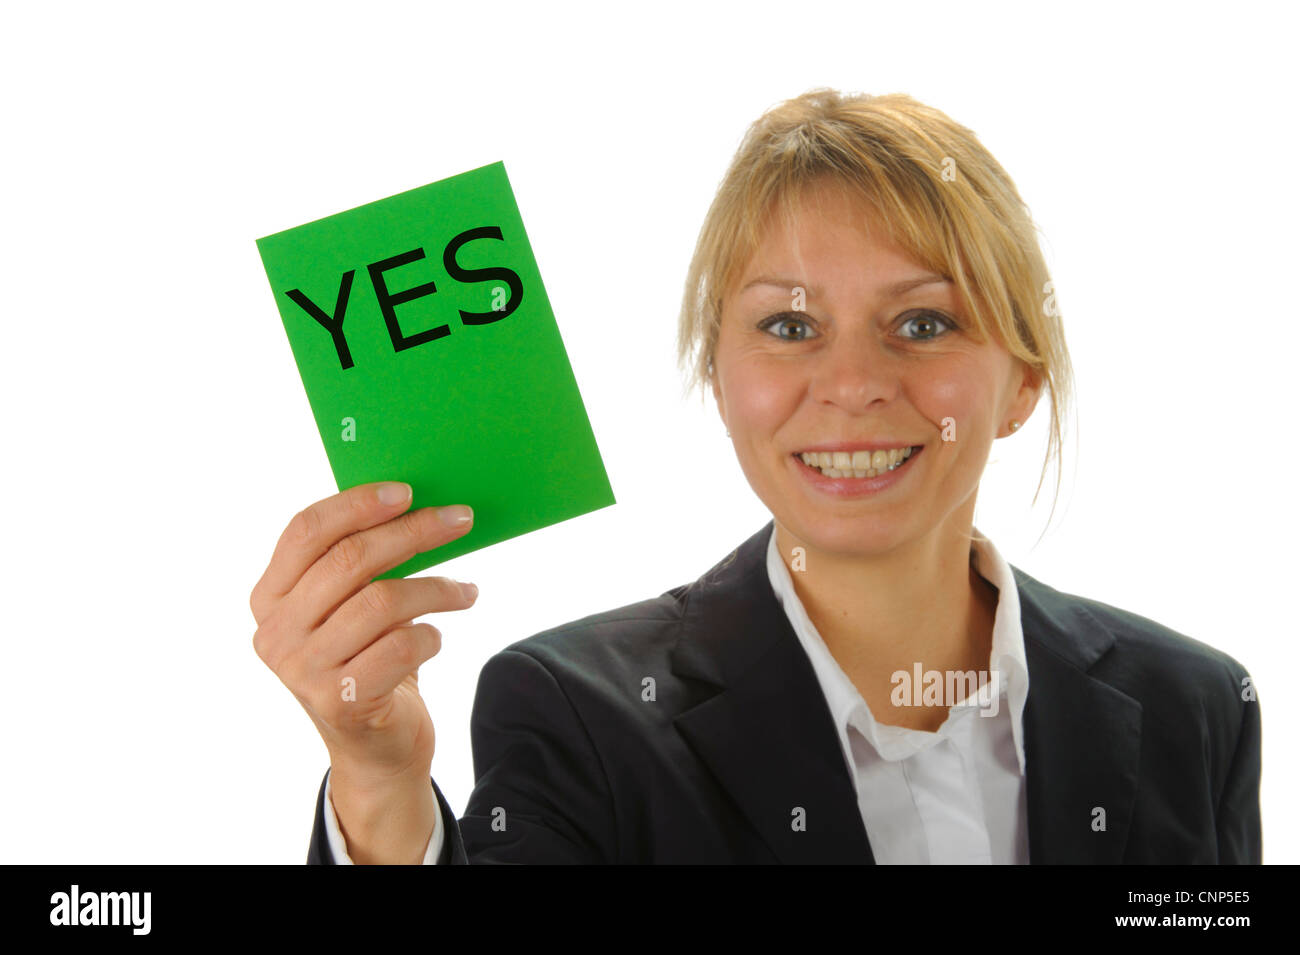 green card for positive voting Stock Photo